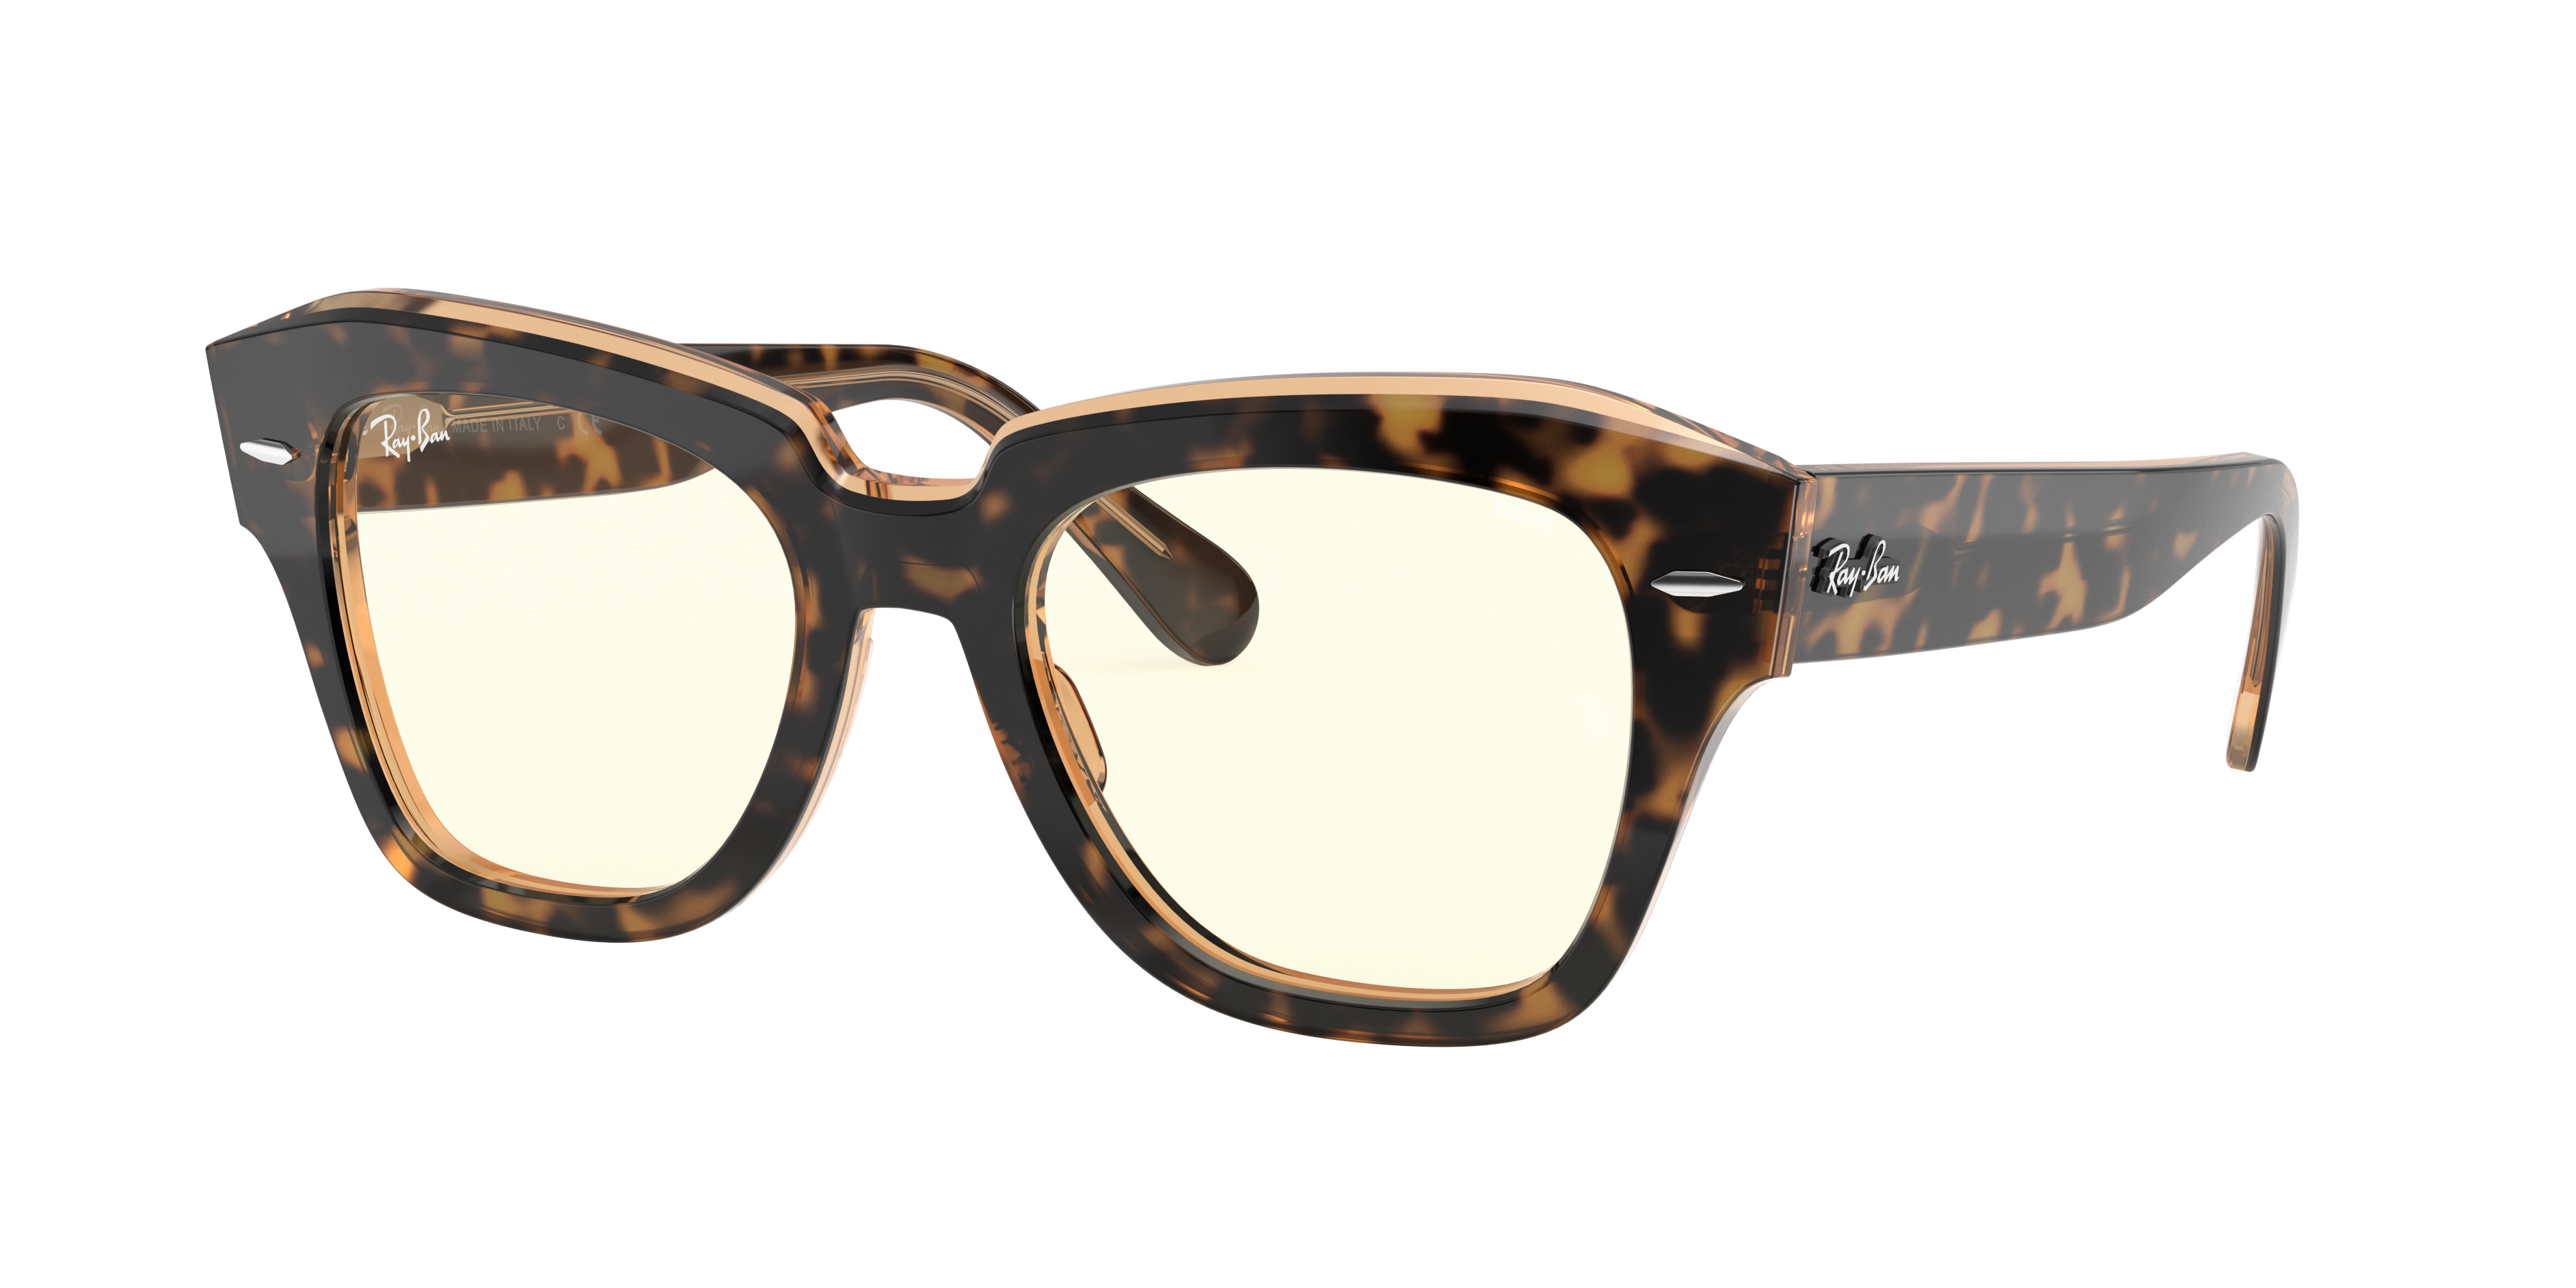 Ray Ban State Street Blue Light Clear Evolve Rb2186 Tortoise Acetate Grey Lenses 0rbbl49 Ray Ban Usa